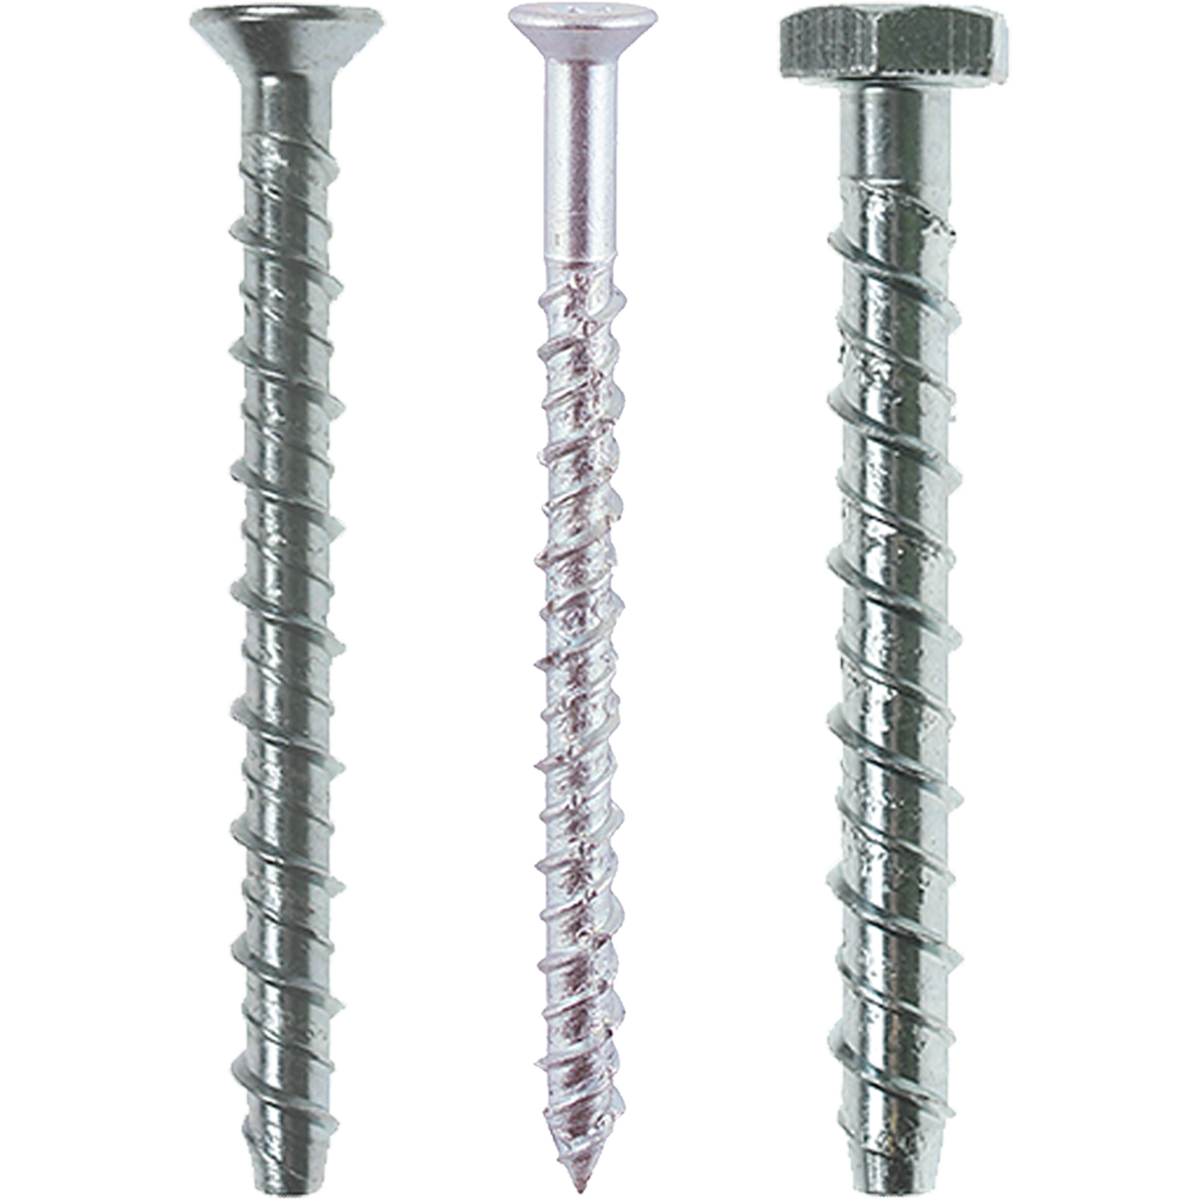 A range of concrete bolts and screws for use in concrete, stone, brick, and concrete block.